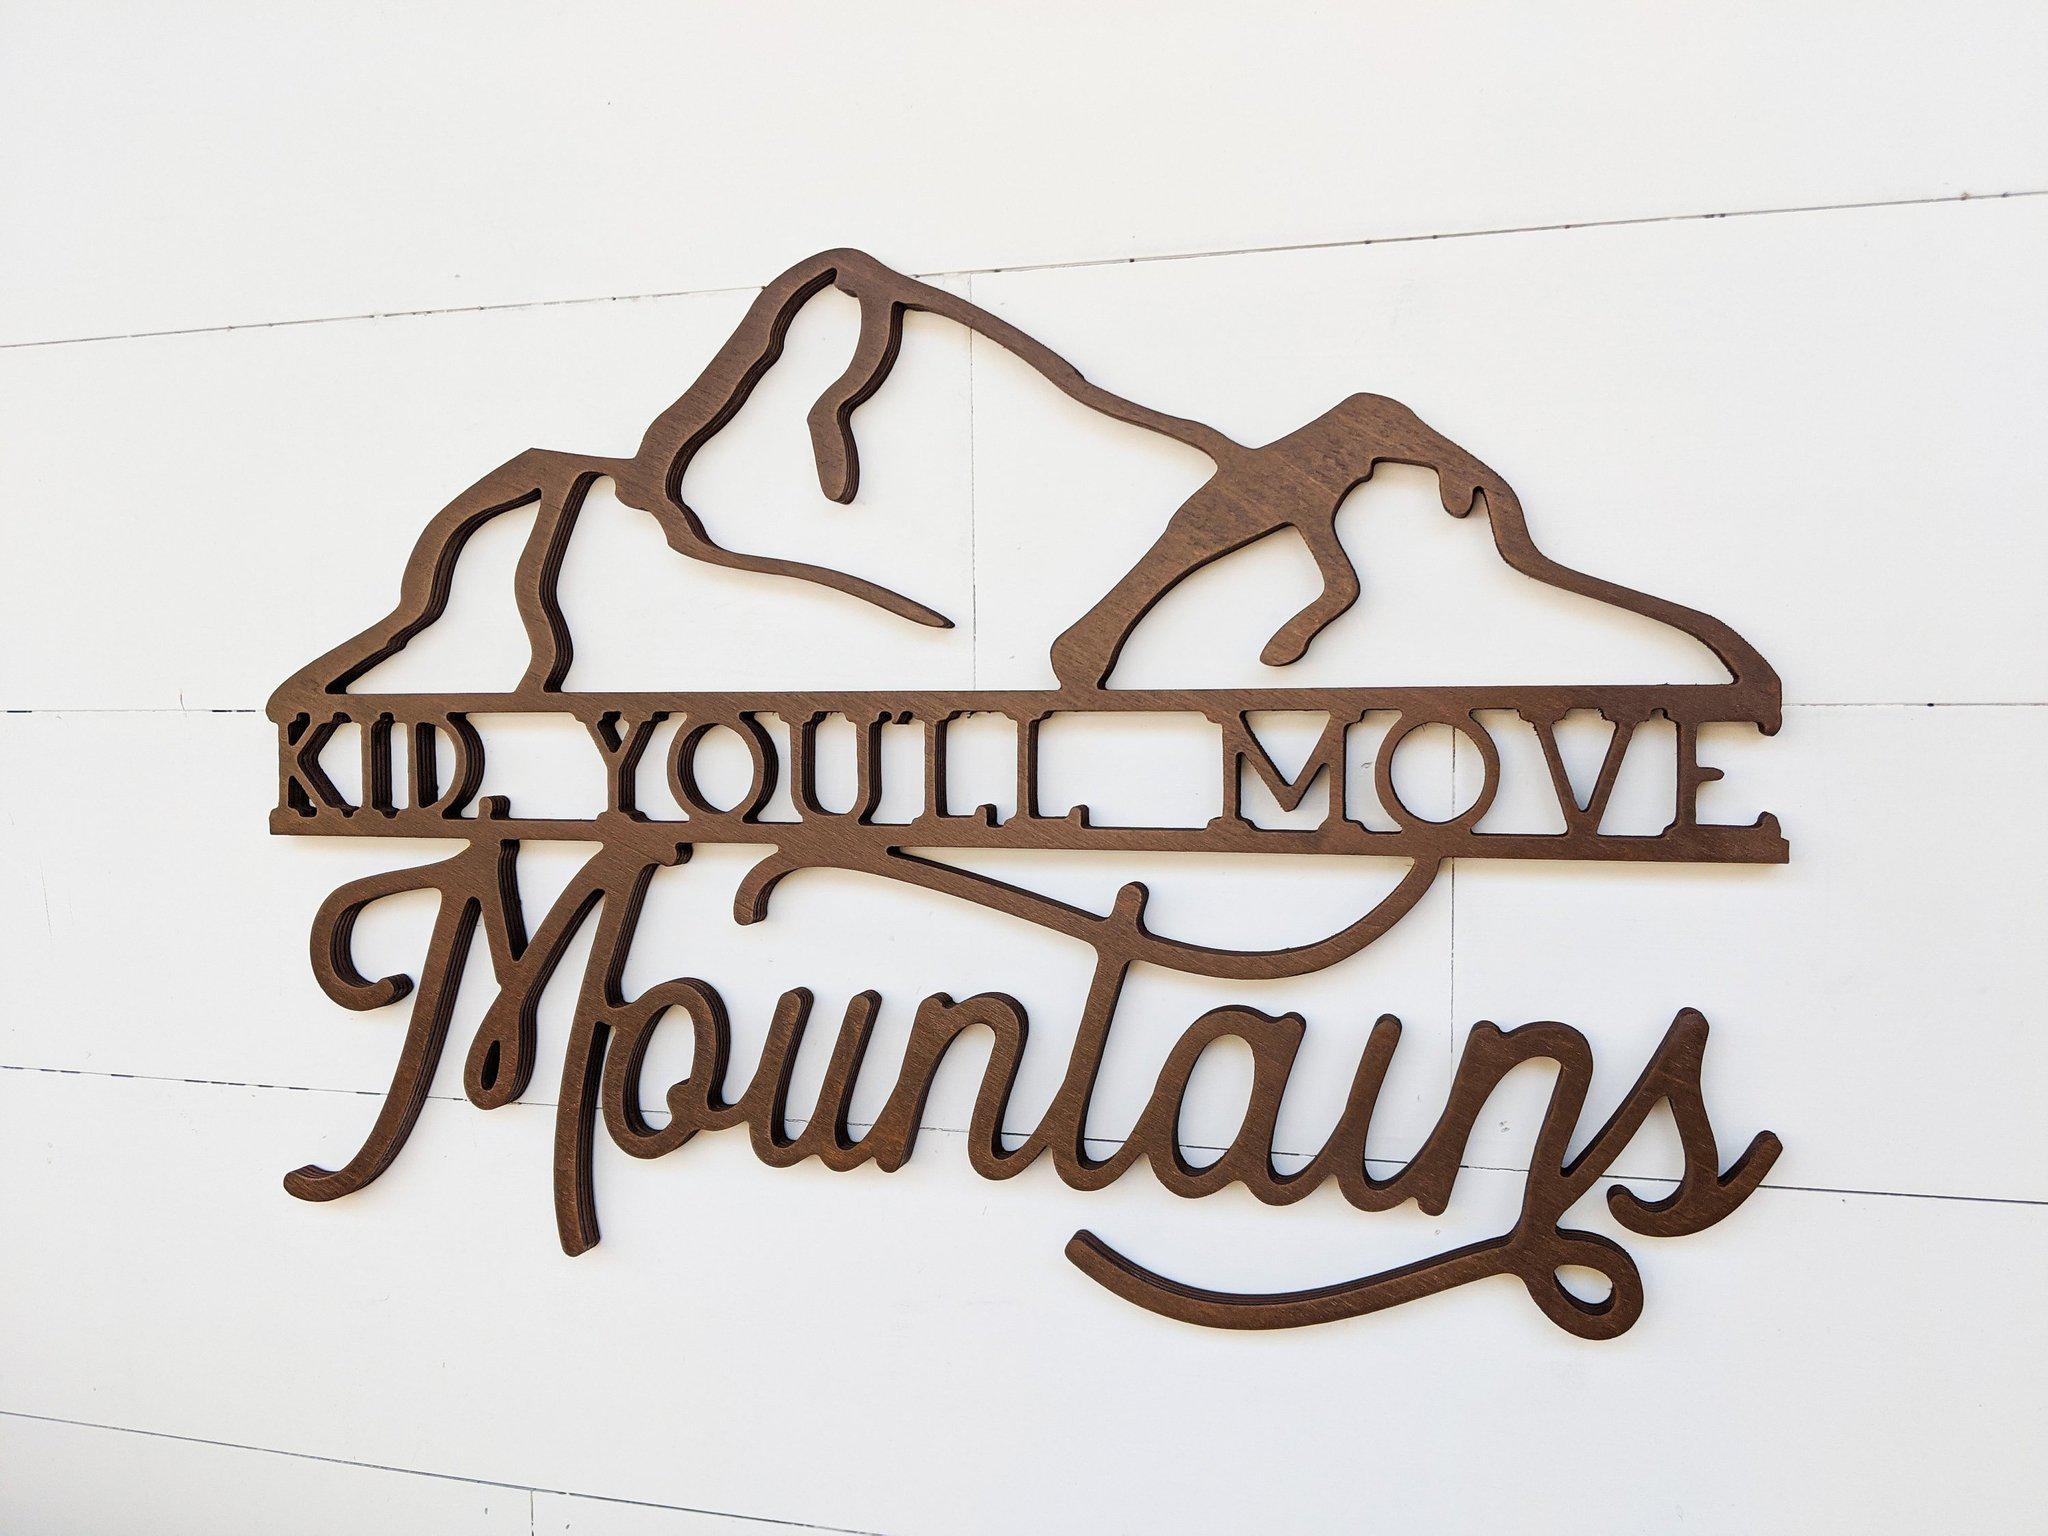 Kid, You'll Move Mountains